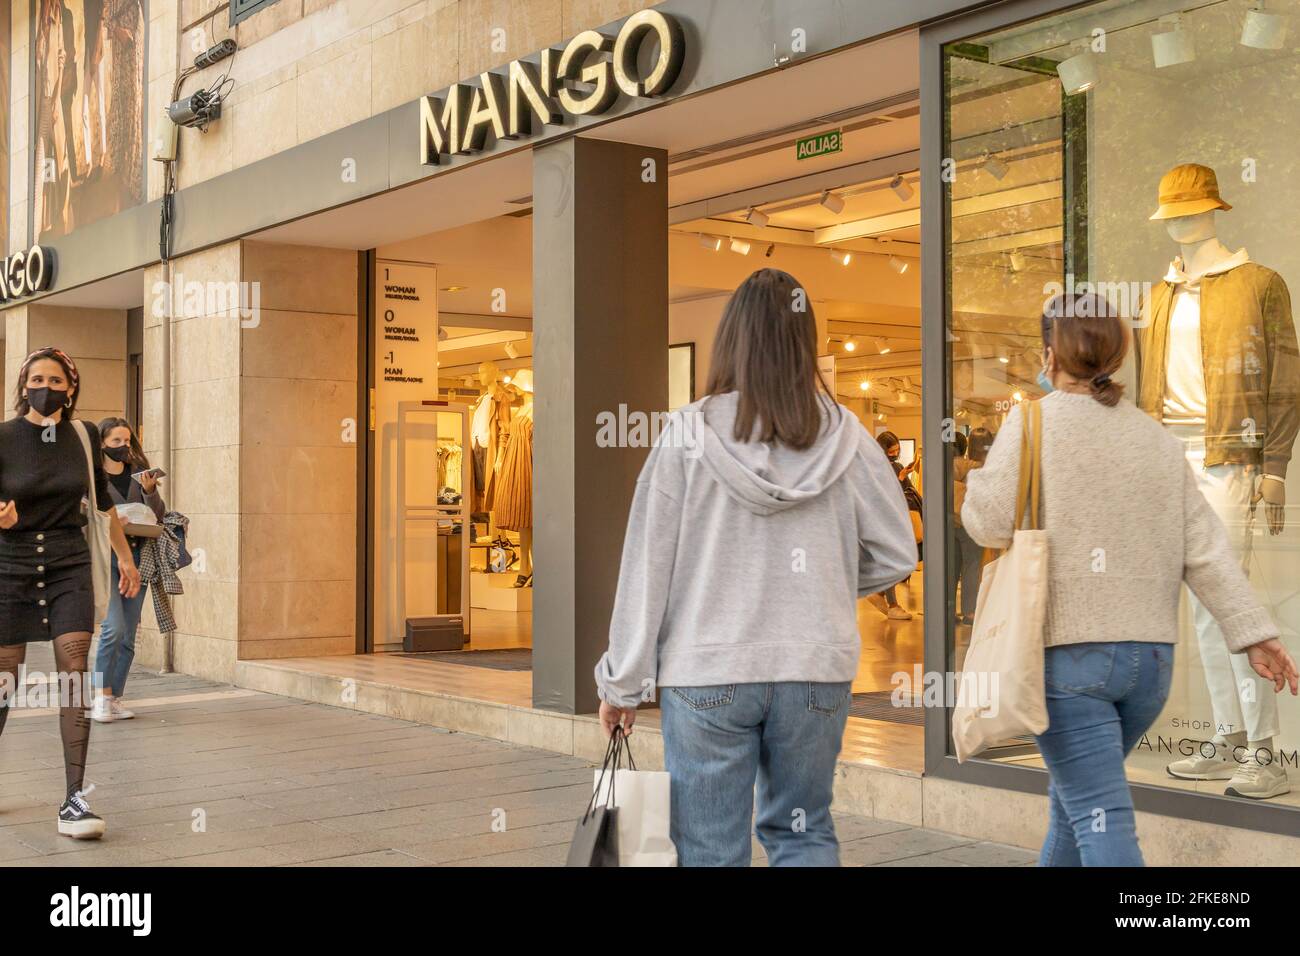 Palma de Mallorca, Spain; april 23 2021: Shop window of a clothing and accessories store belonging to the multinational Mango, with wearing fac Stock Photo Alamy